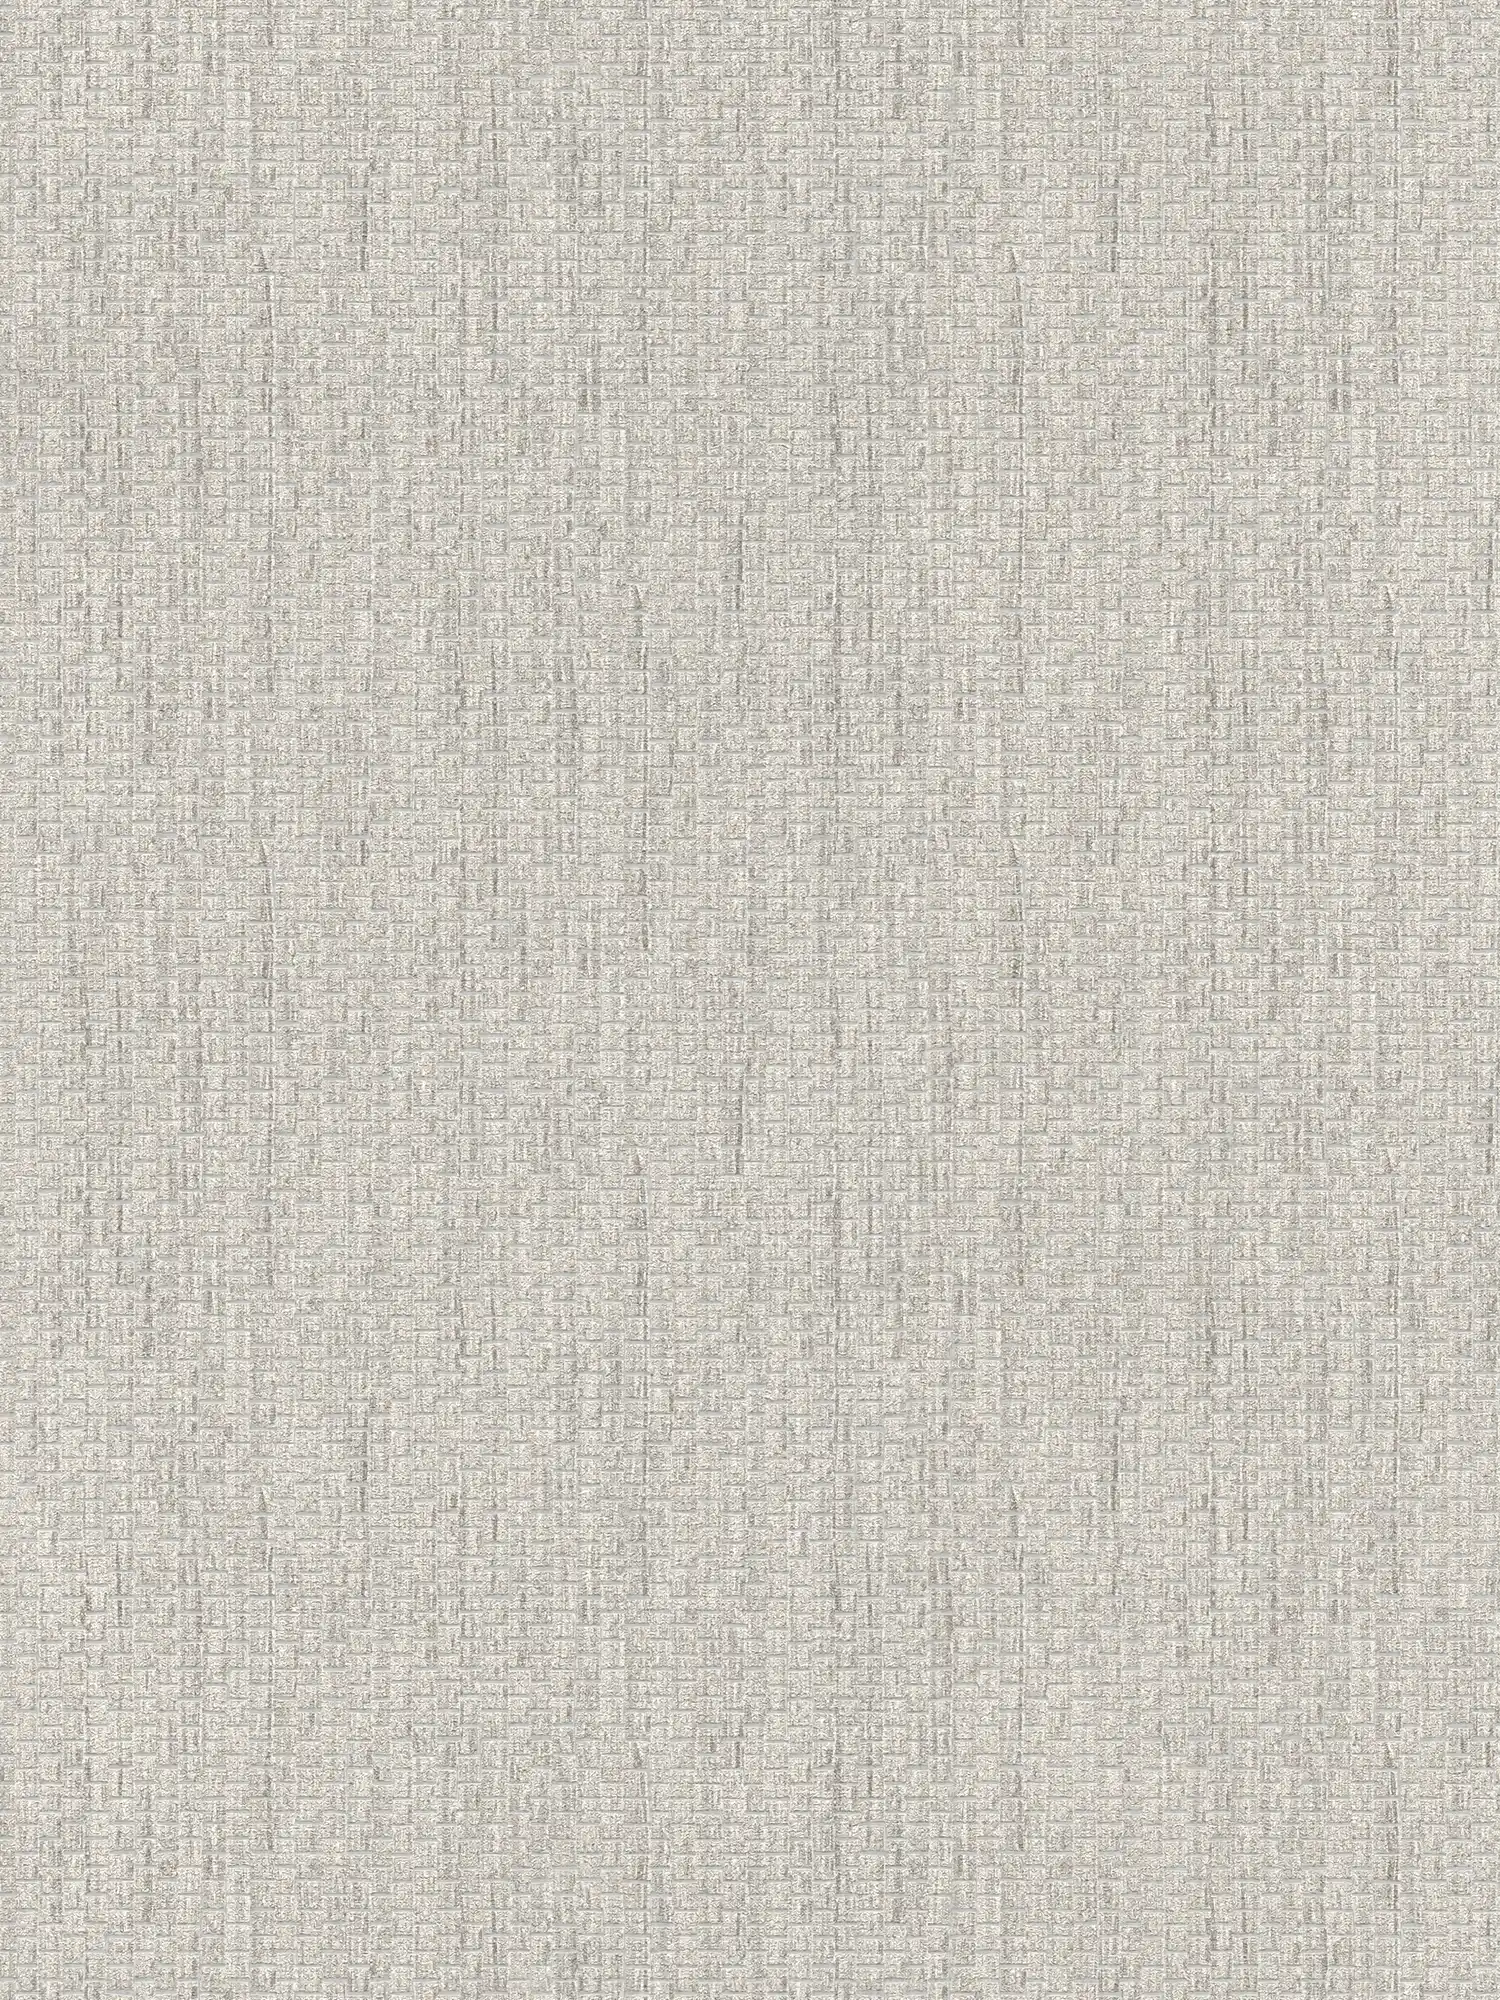 Wallpaper with raffia natural fabric pattern - grey
